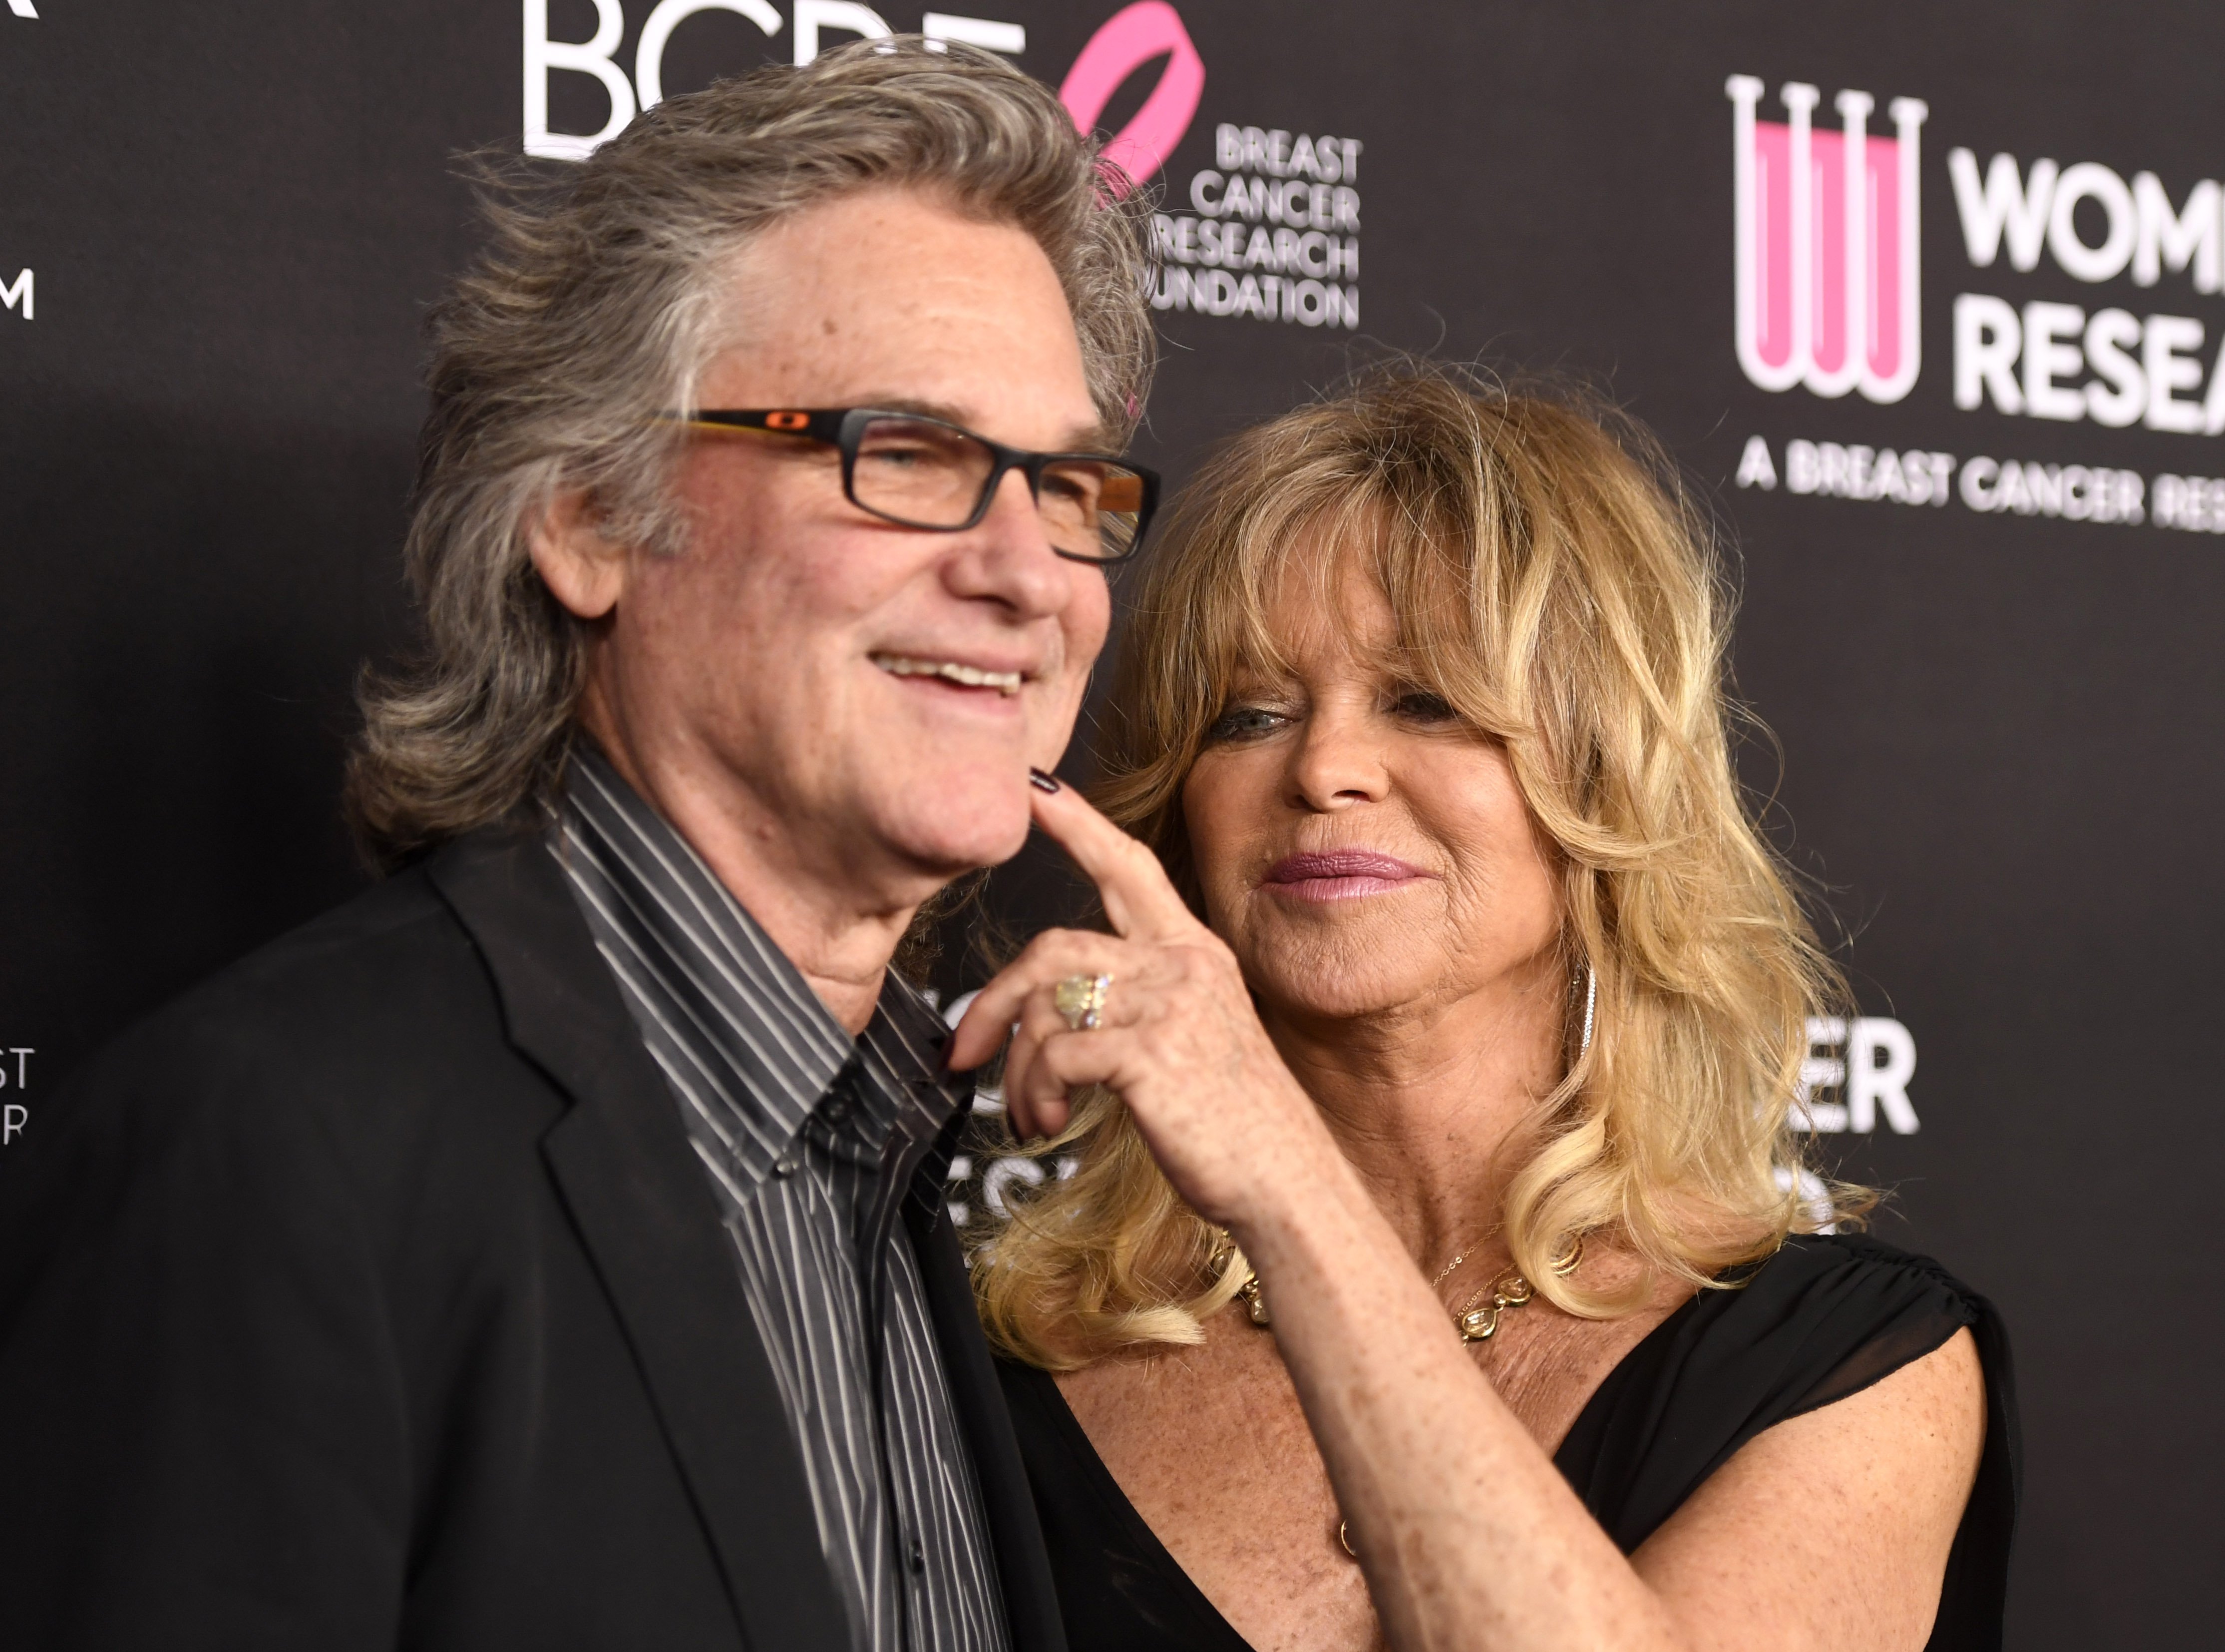 Kurt Russell and Goldie Hawn attend The Women's Cancer Research Fund's An Unforgettable Evening Benefit Gala at the Beverly Wilshire Four Seasons Hotel on February 28, 2019 in Beverly Hills, California